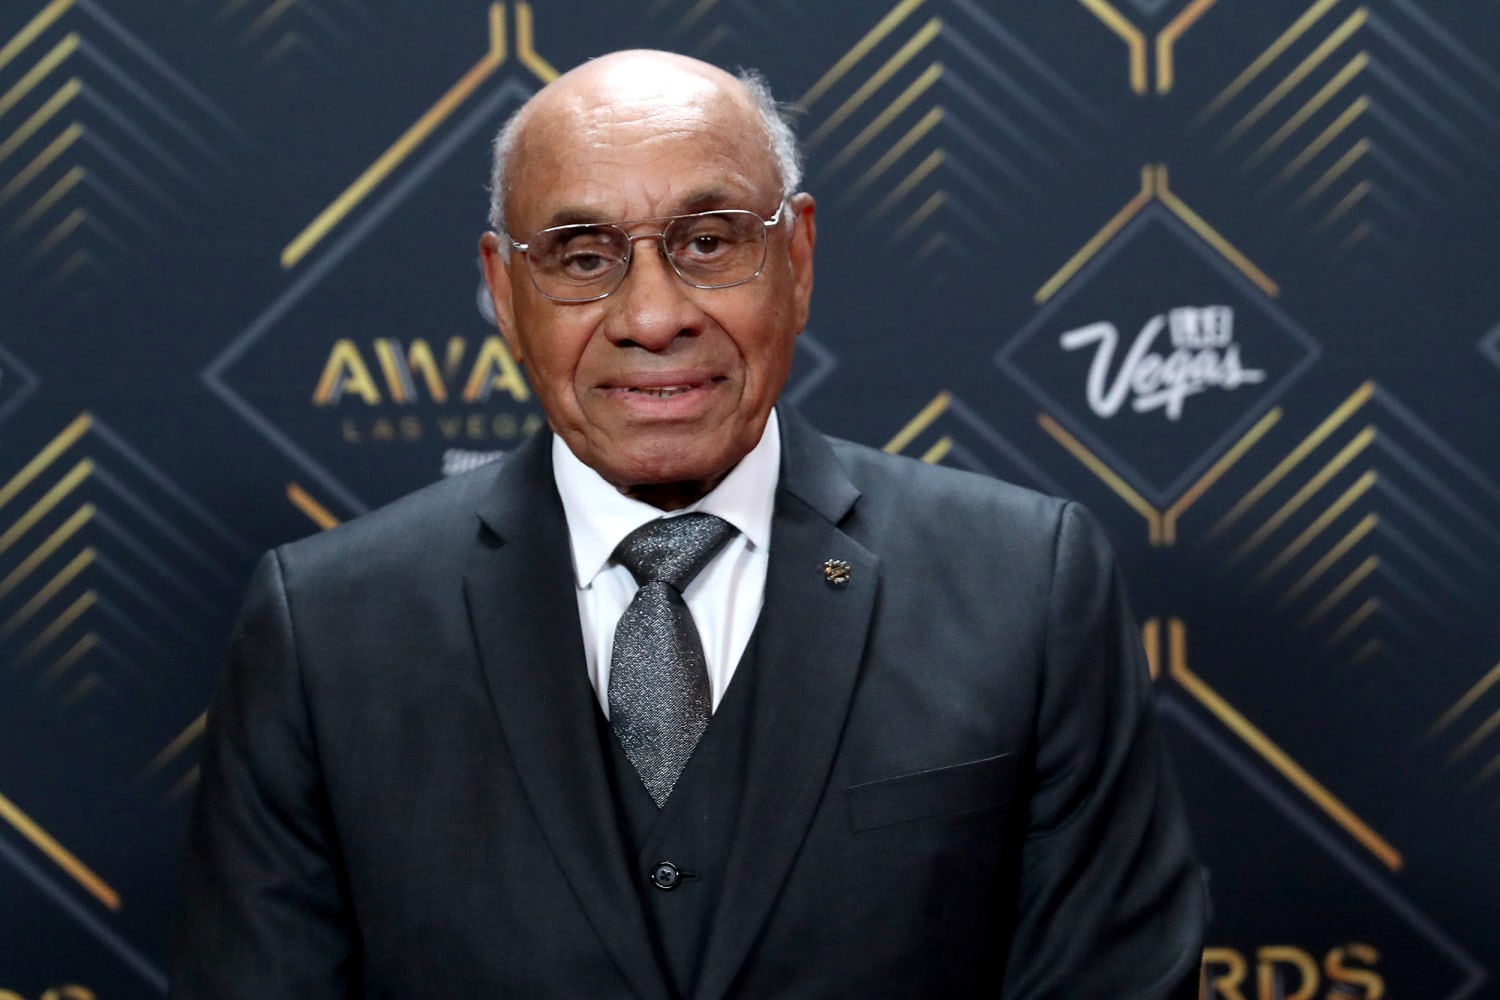 Boston Bruins to retire the jersey of Willie O'Ree, who broke the league's  color barrier